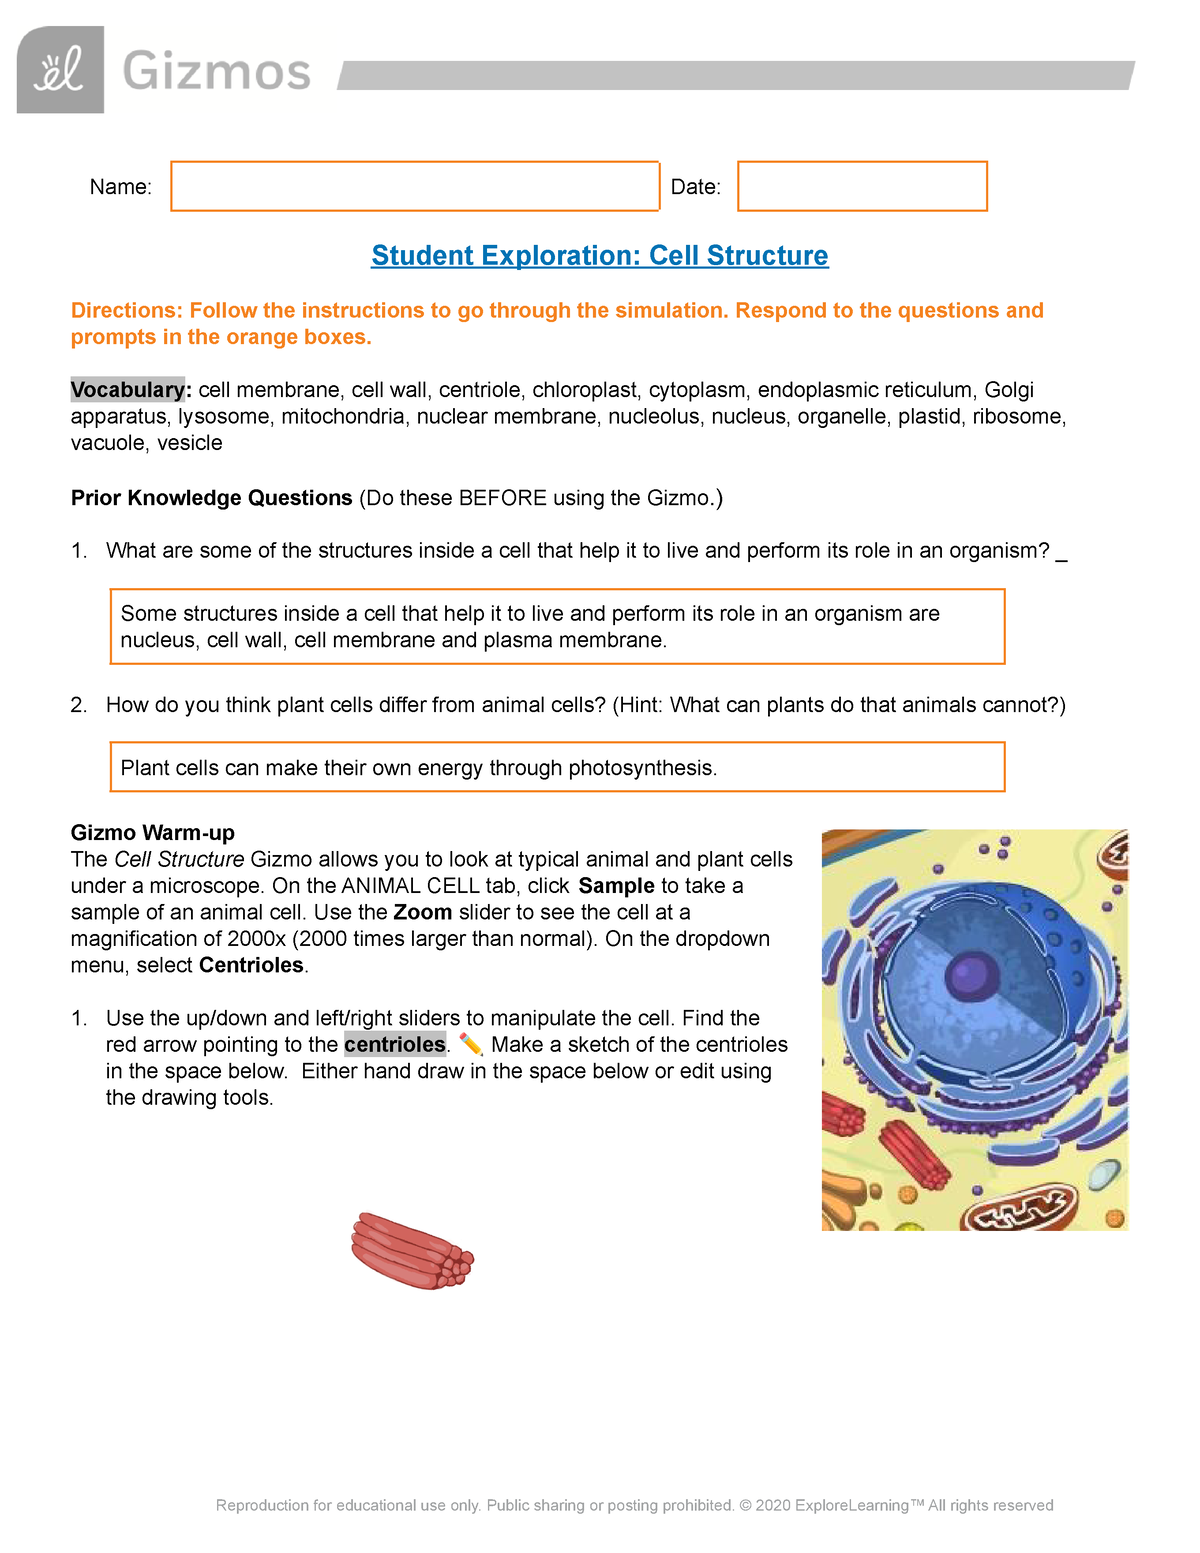 SBI4U Cell Structure SE - Name: Date: Student Exploration: Cell Structure  Directions: Follow the - Studocu